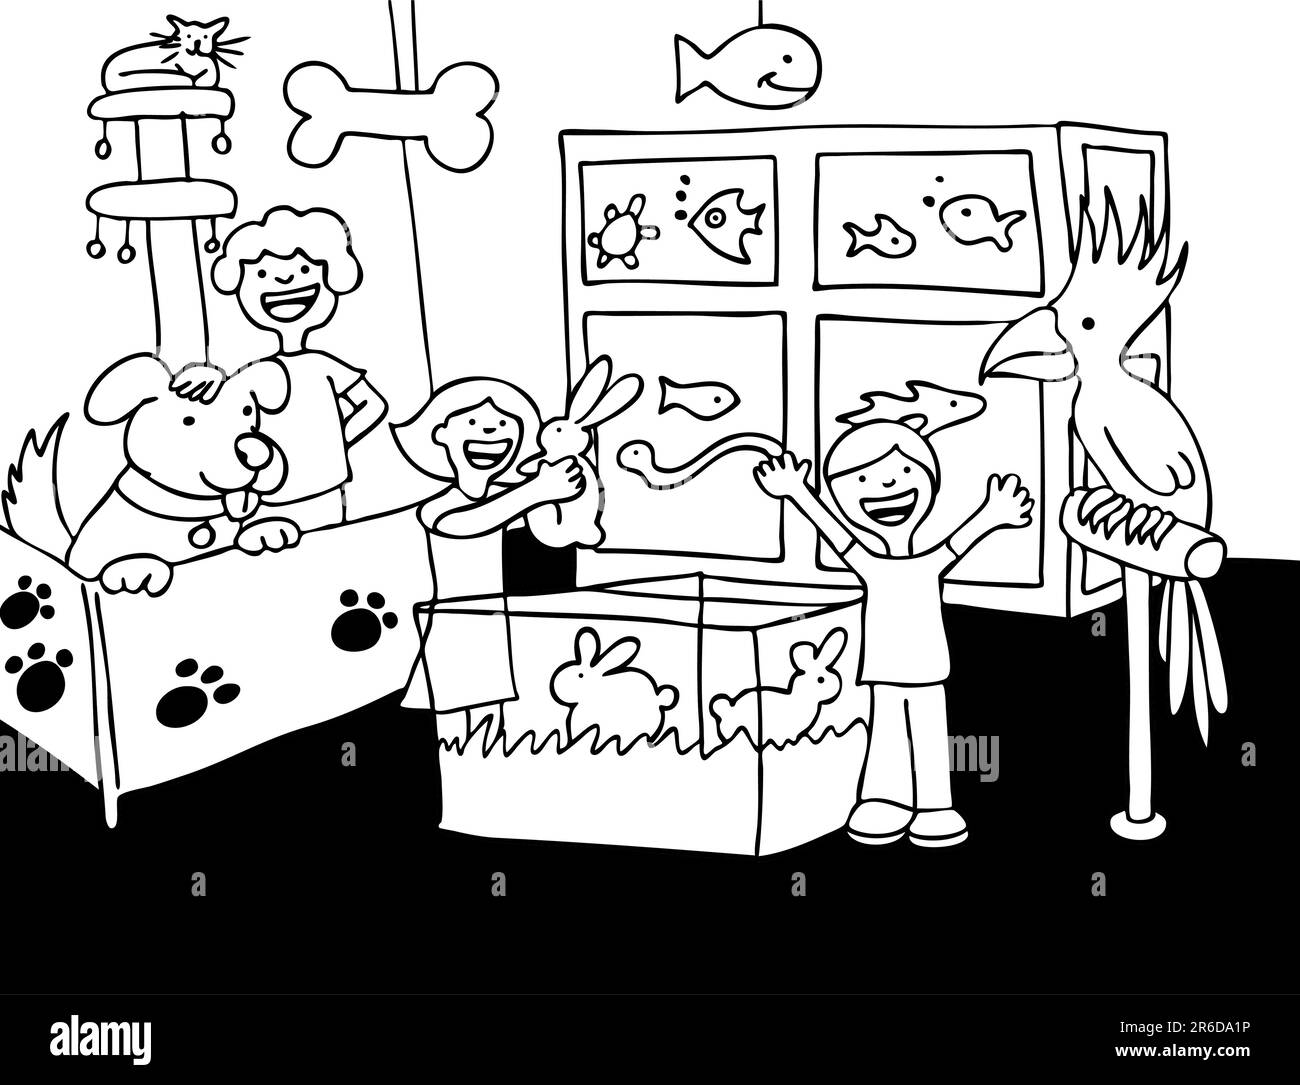 Children look at animals in a pet store - black and white version. Stock Vector